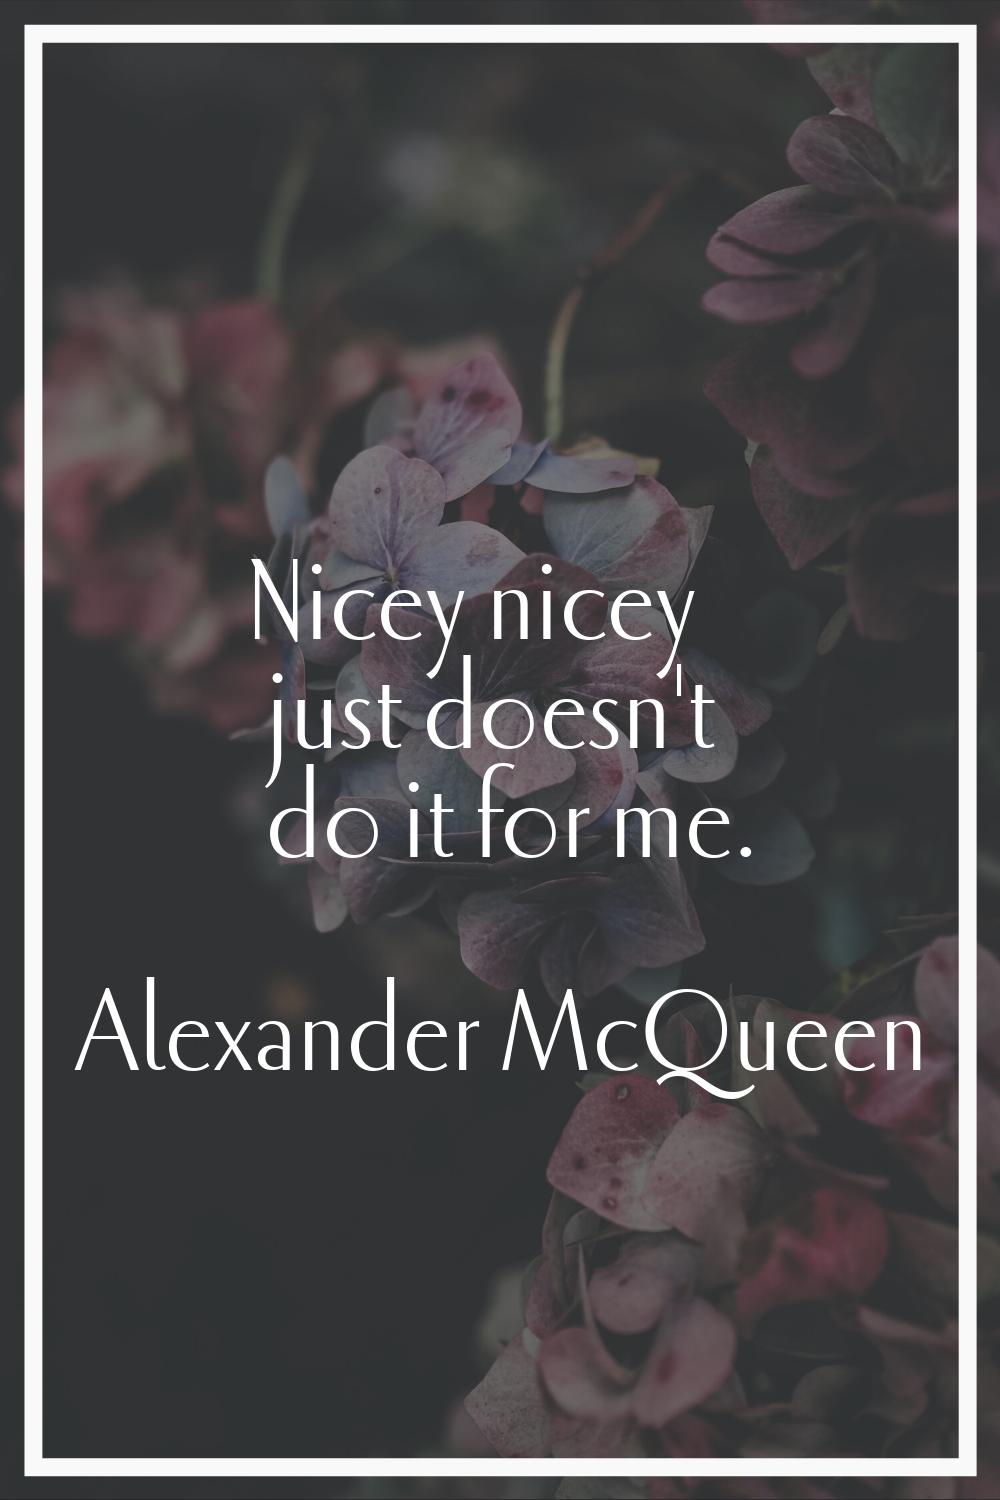 Nicey nicey just doesn't do it for me.